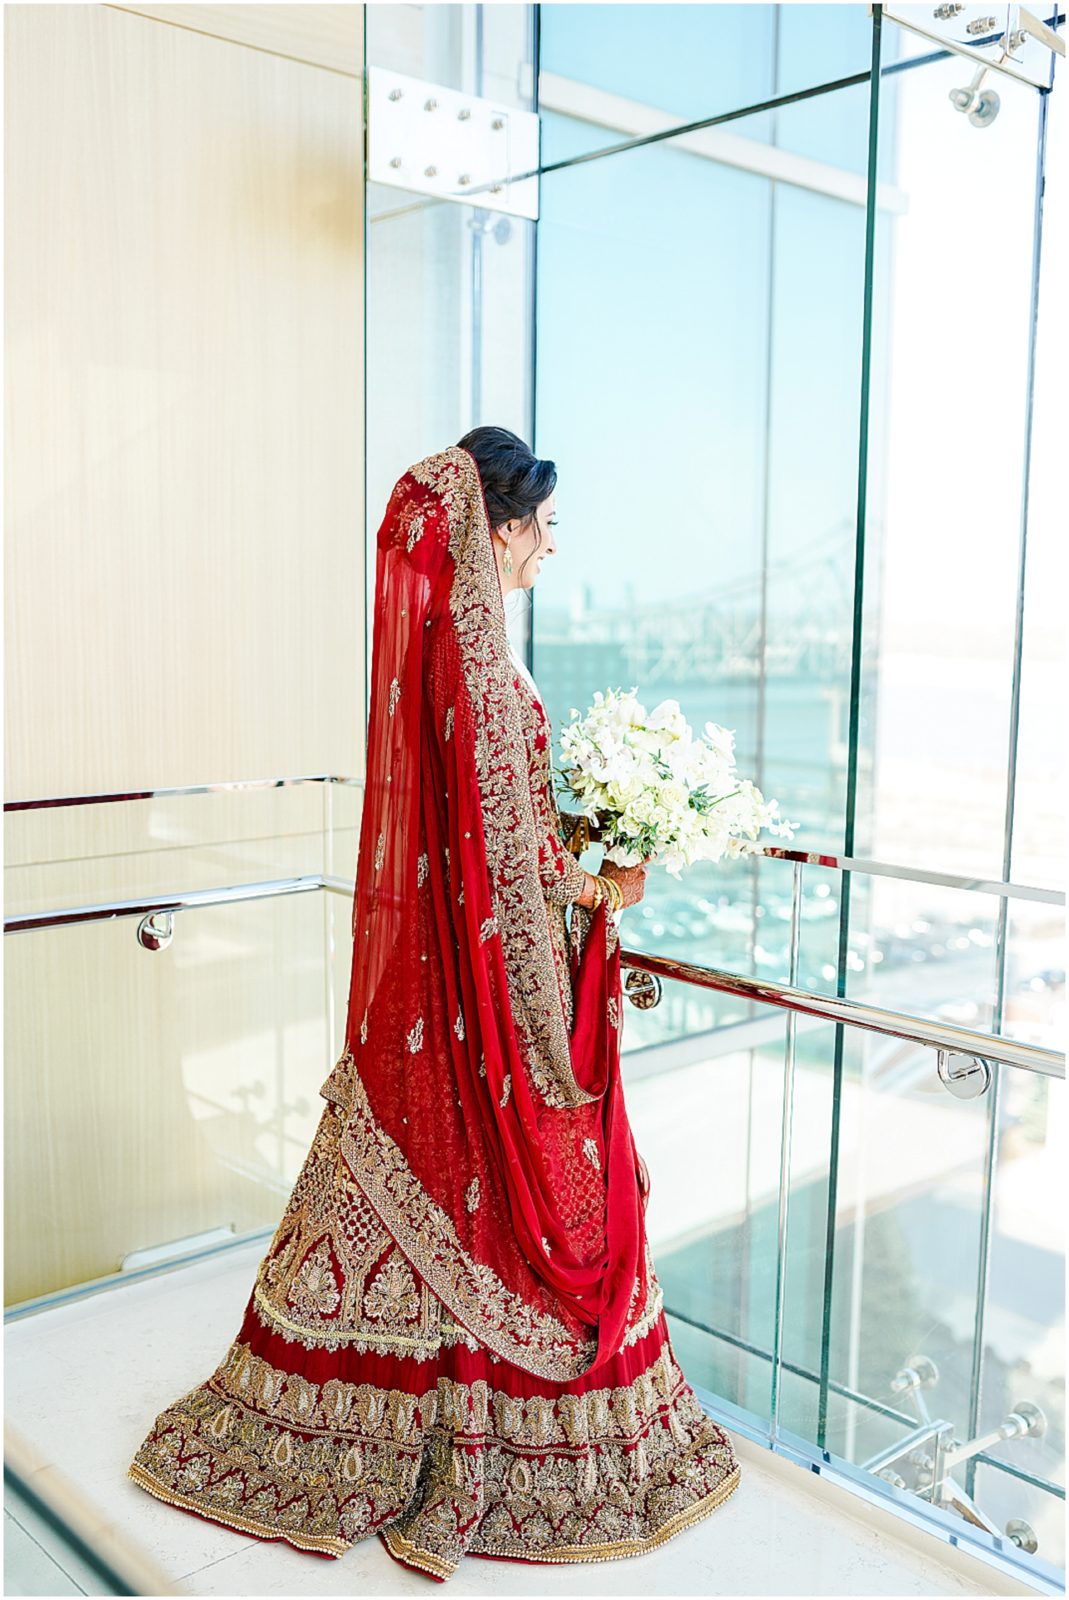 beautiful indian bride looking out the window - mariam saifan photography - best wedding photographer in st louis and kansas city 